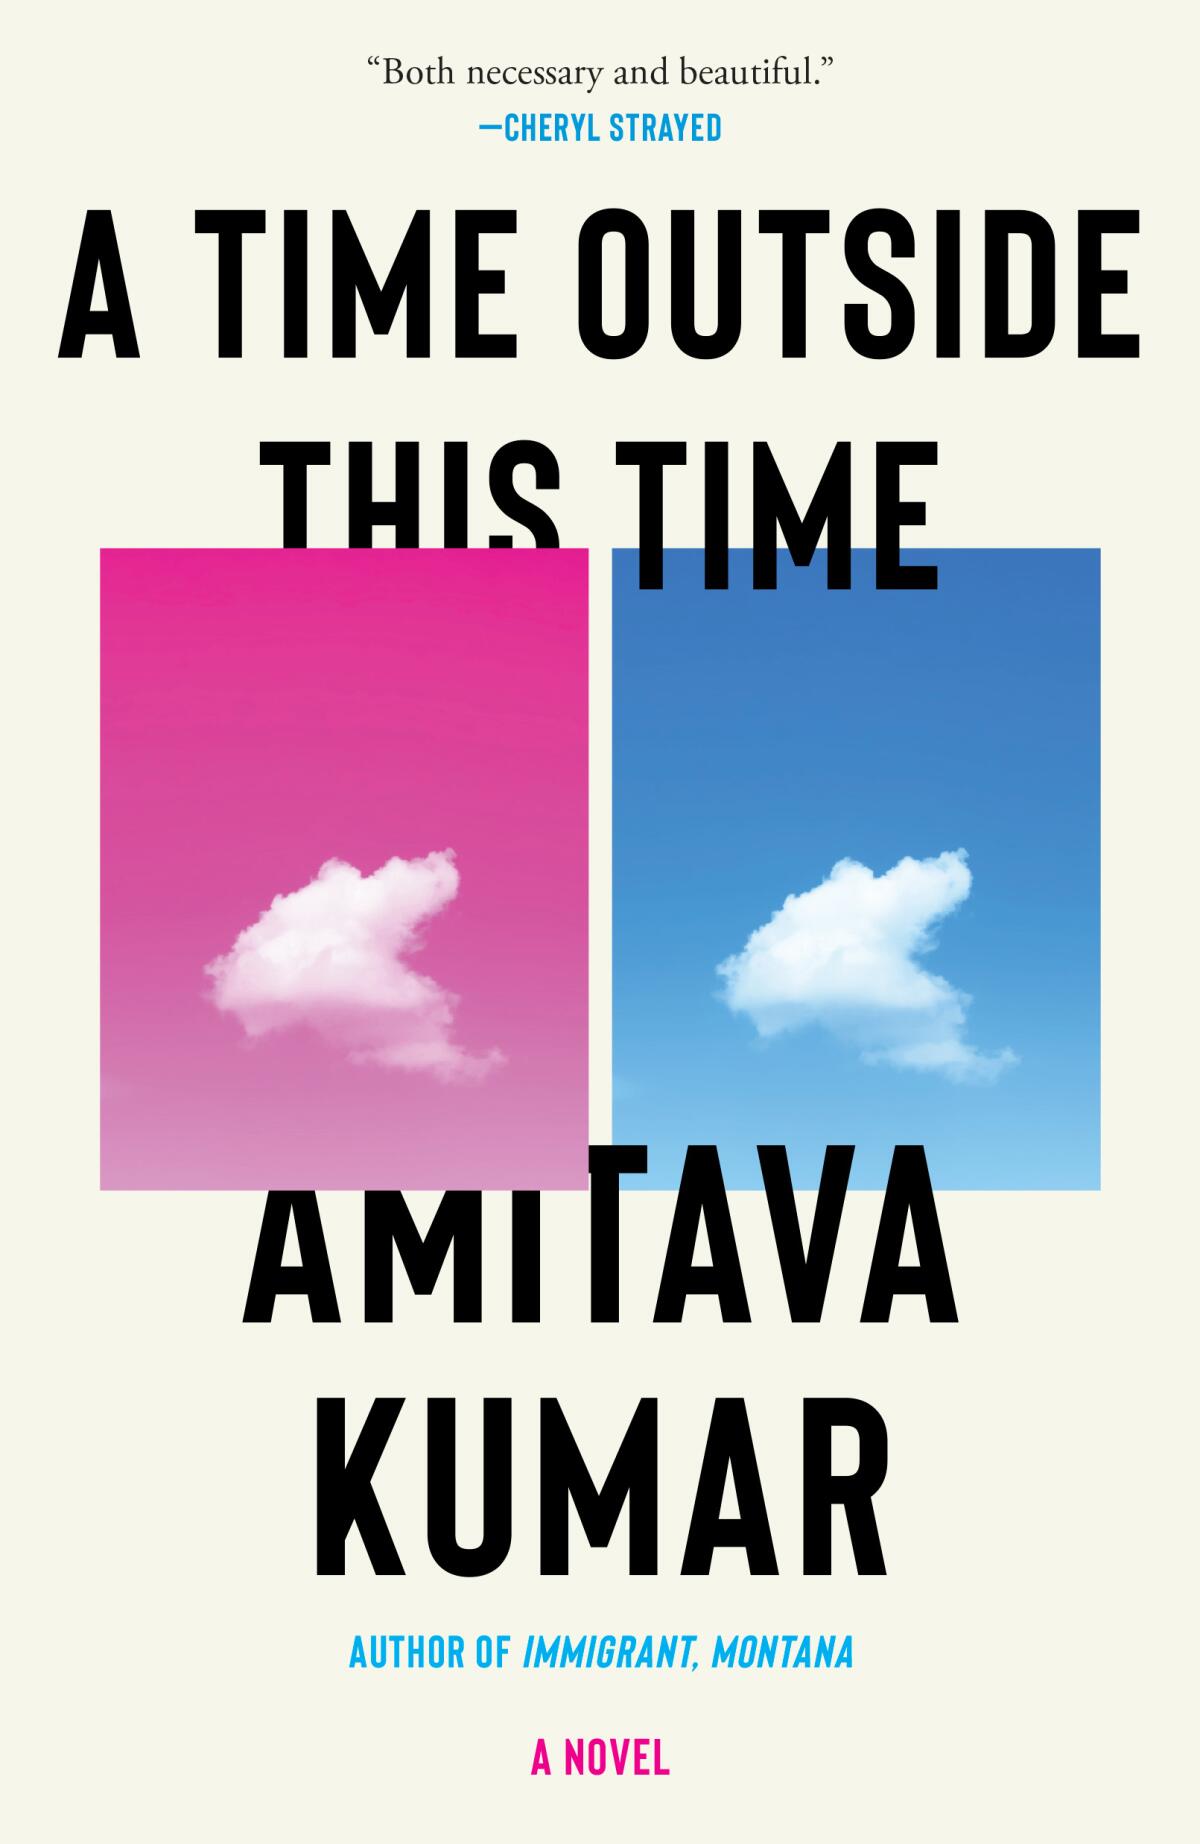 "A Time Outside This Times," by Amitava Kumar